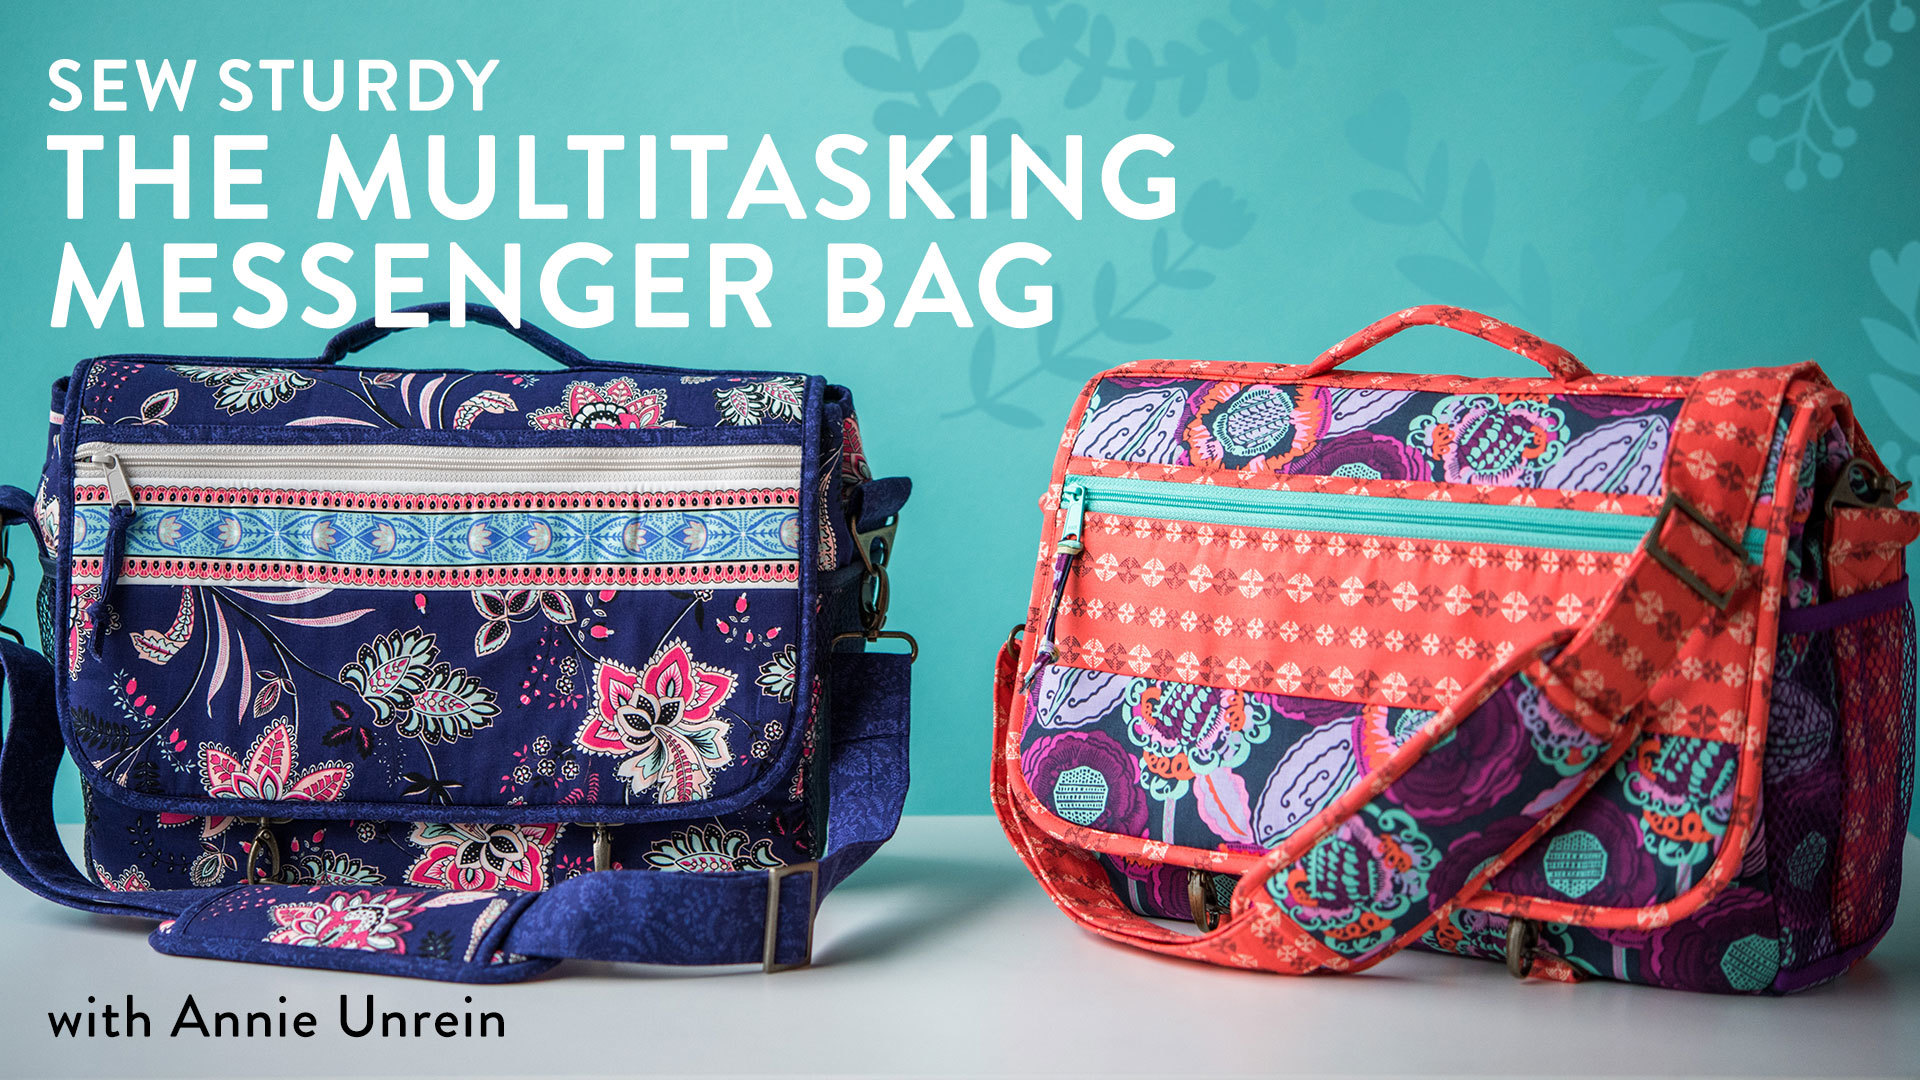 Rosie's Messenger Bag FREE sewing pattern (with video) - Sew Modern Bags